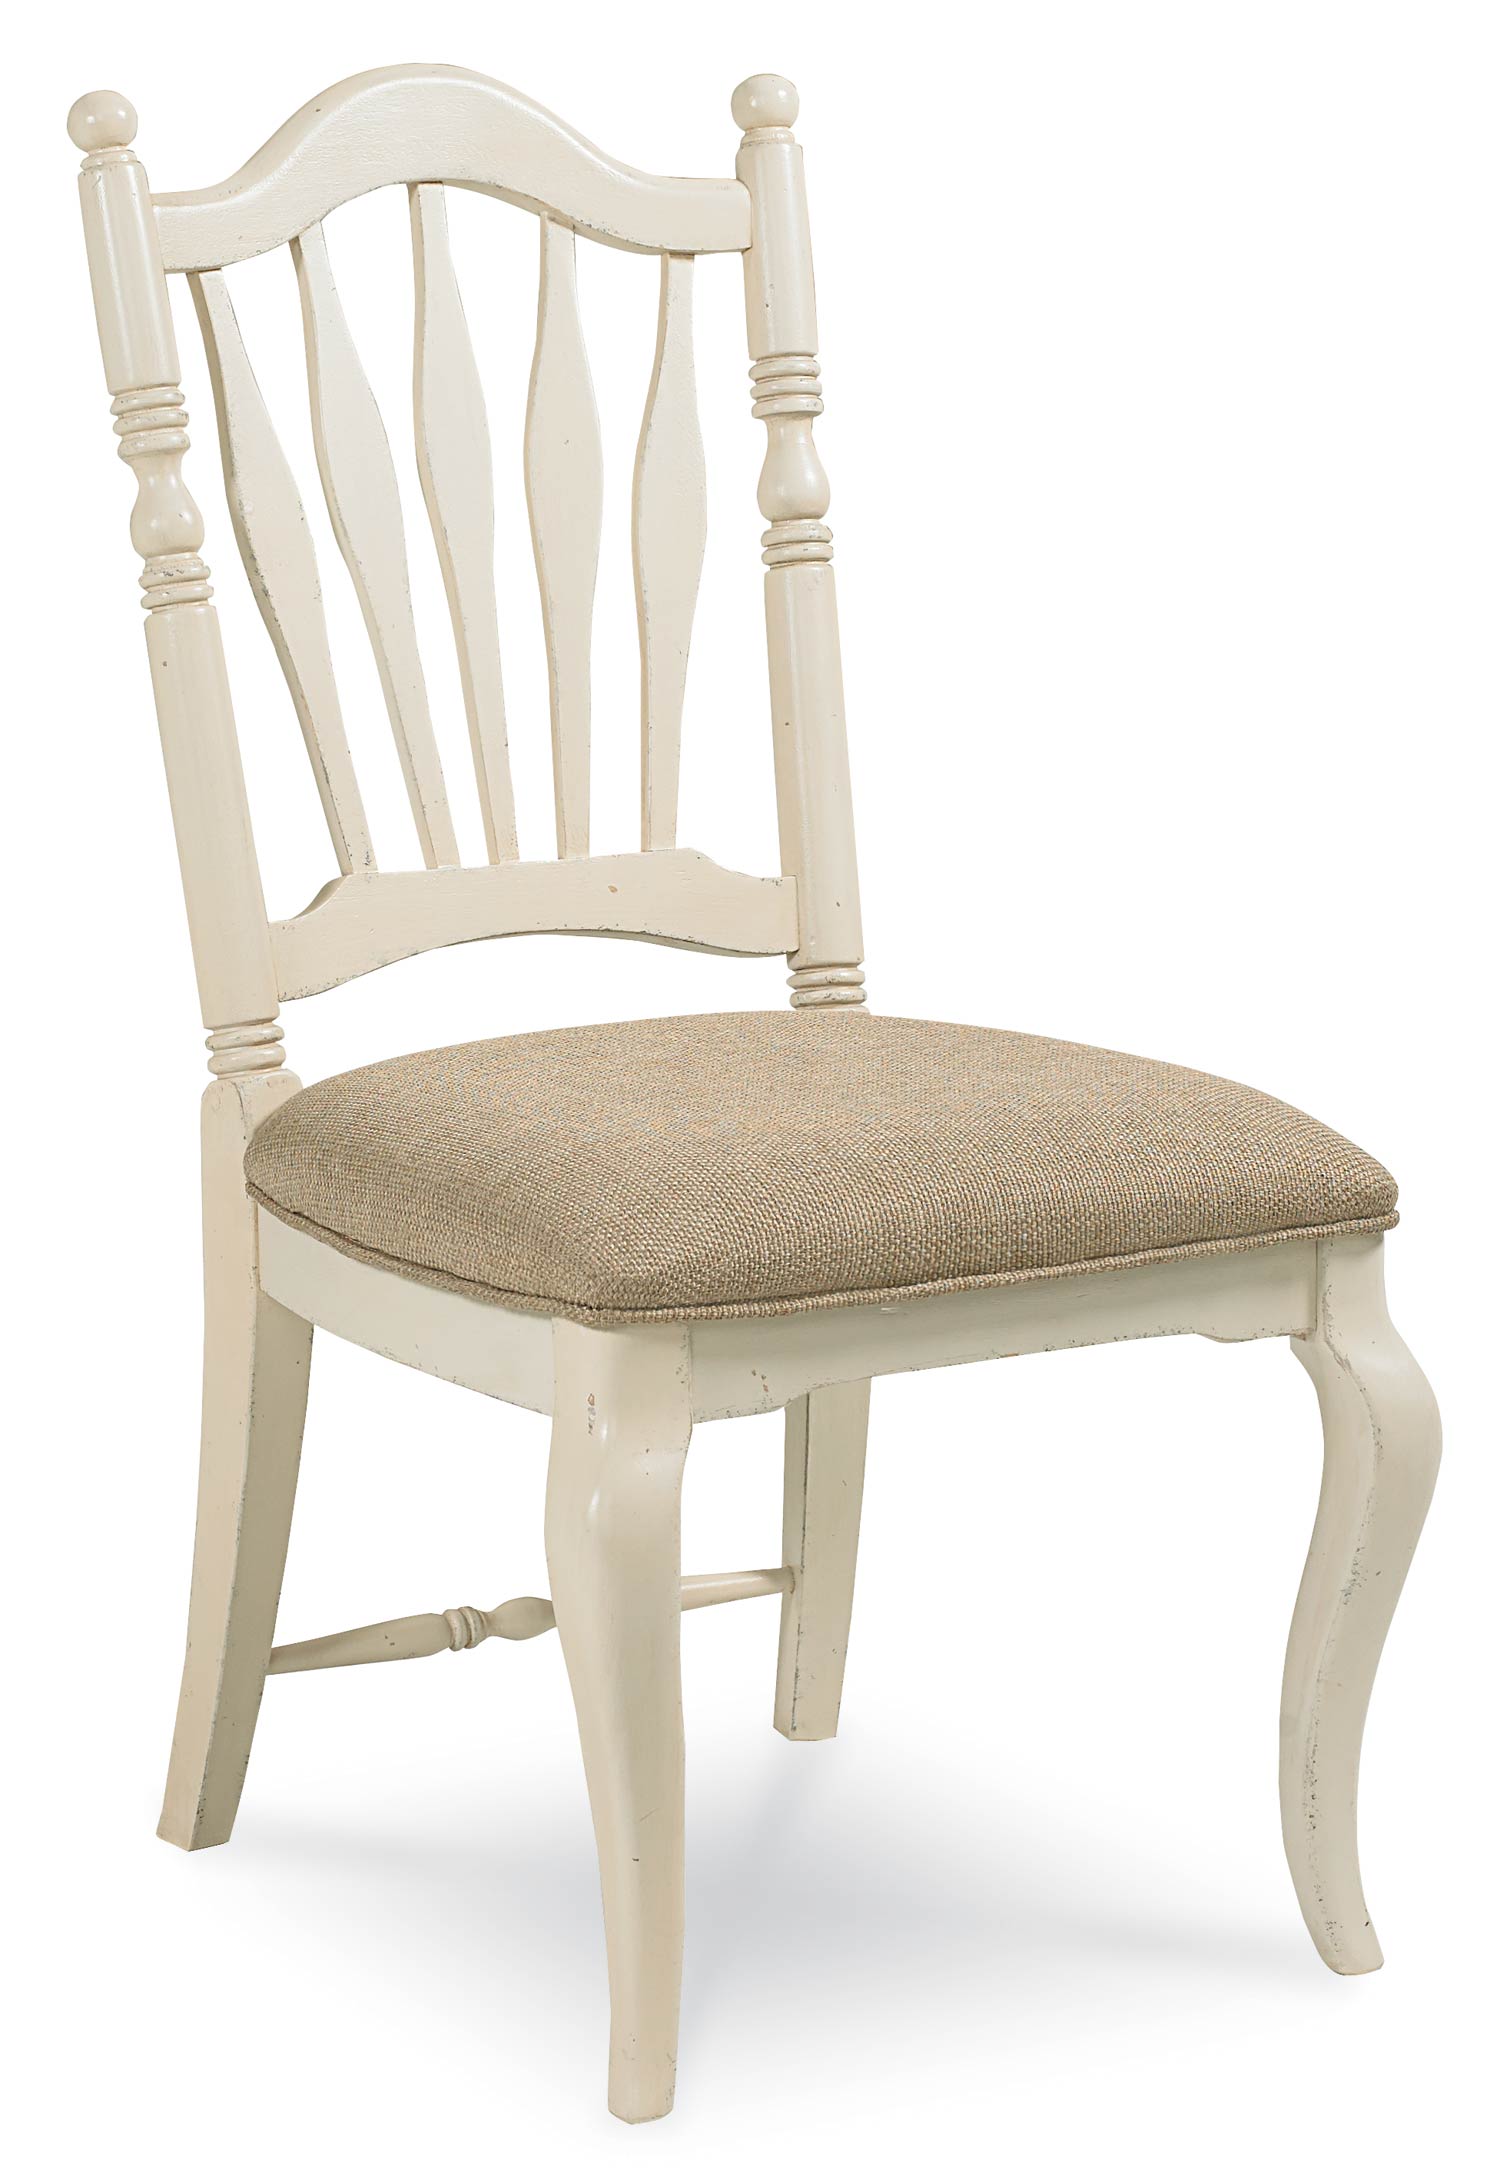 Legacy Classic Haven Sheaf Back Side Chair - Buttercream White/Slight Distressing